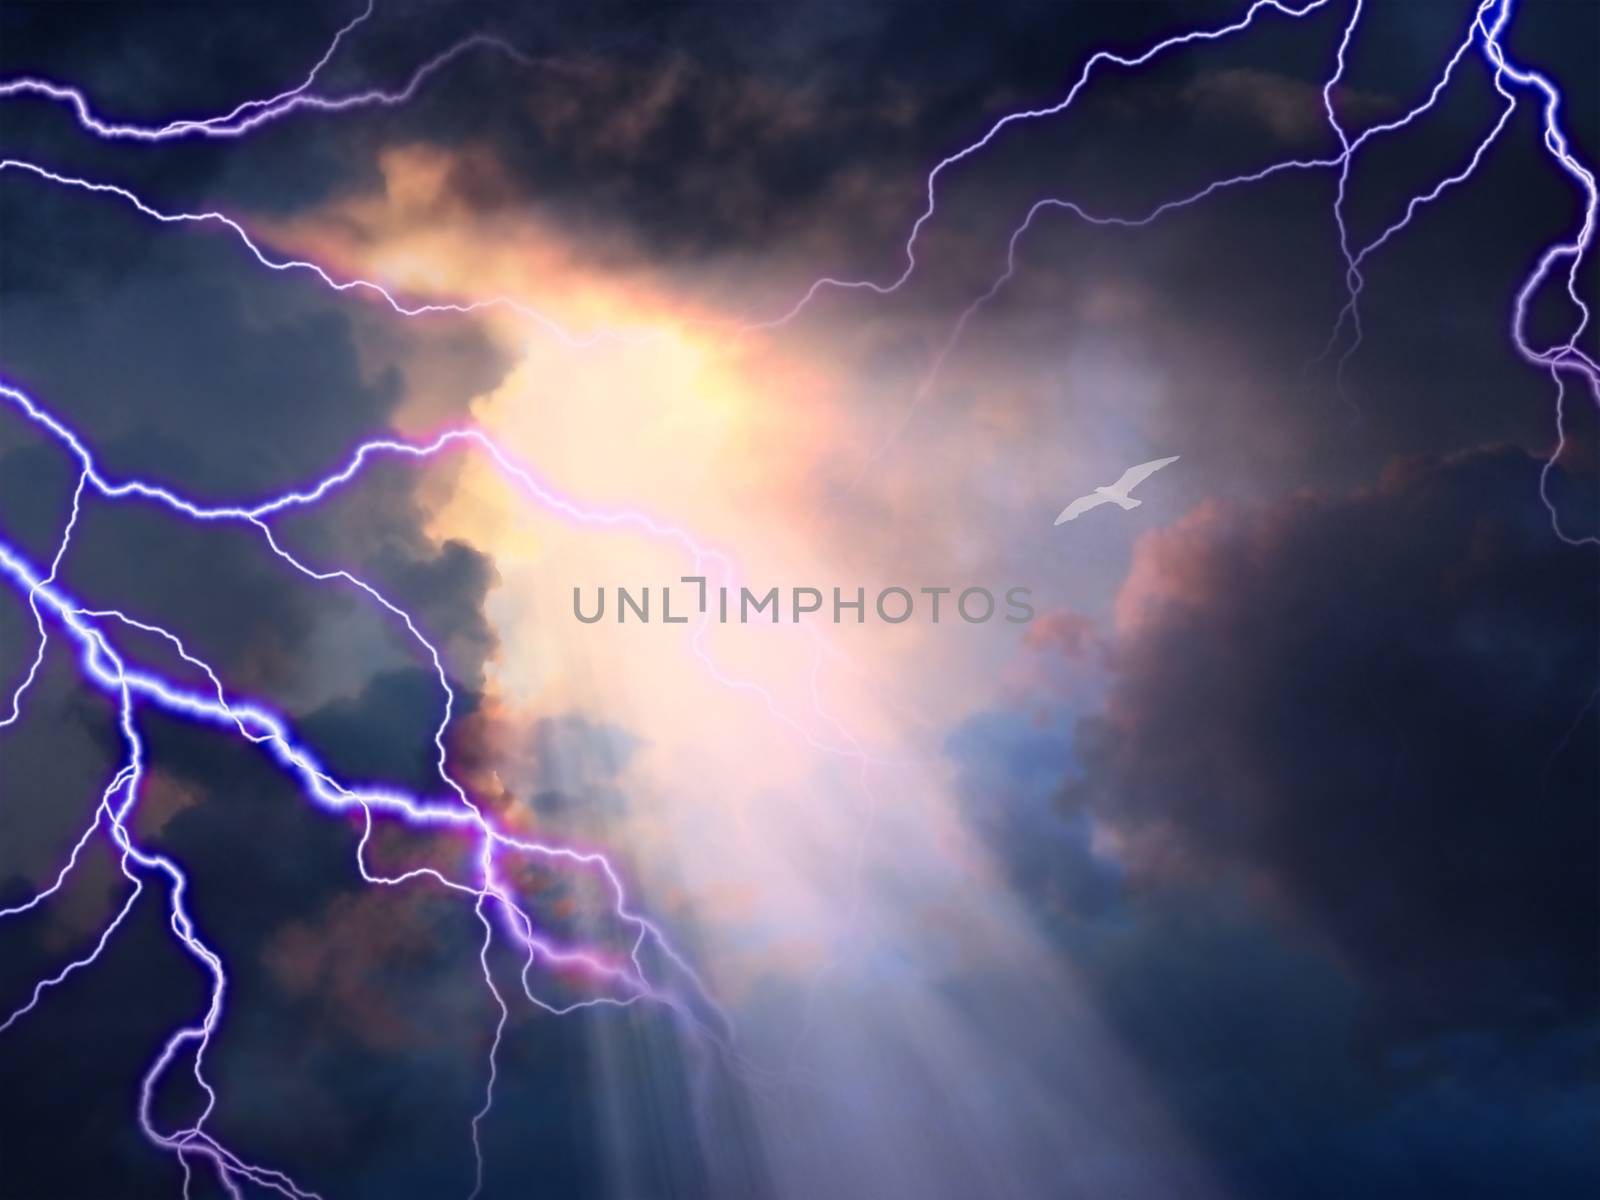 Storm rages about little white bird flying toward sunlight. 3D rendering